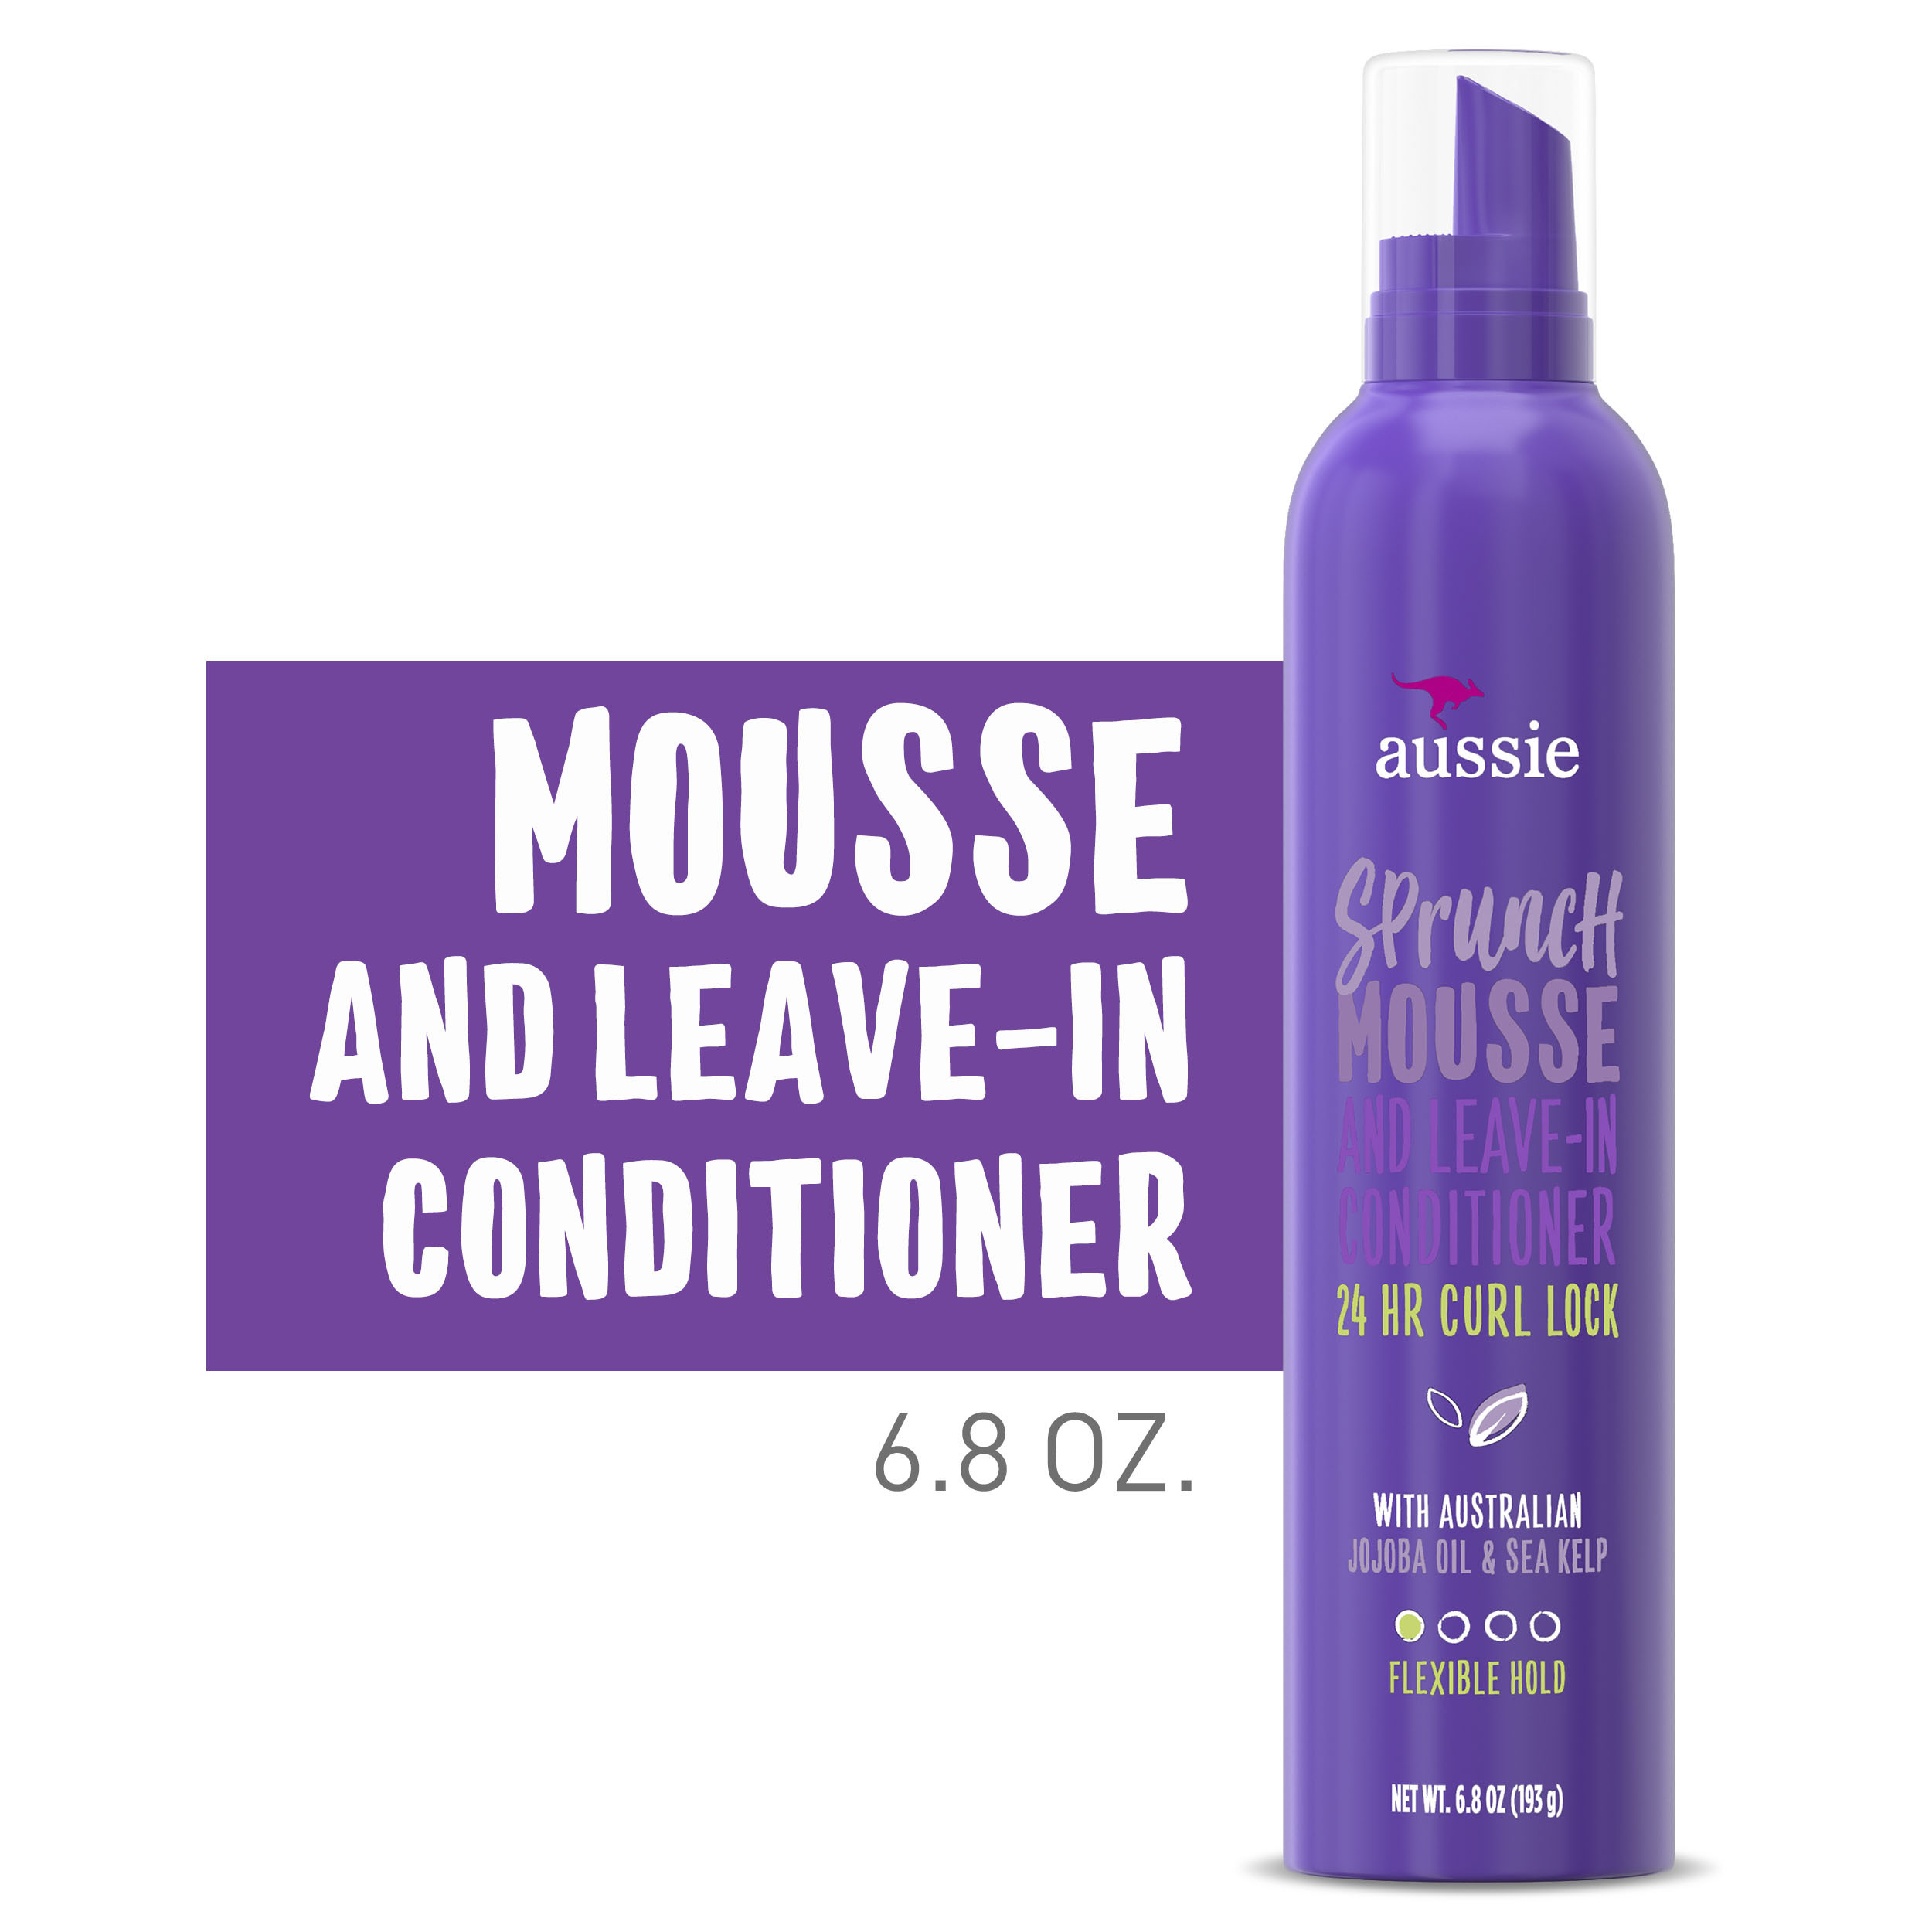 Aussie Sprunch Mousse and Leave-In Conditioner, Flexible Hold, 6.8 oz - image 1 of 9